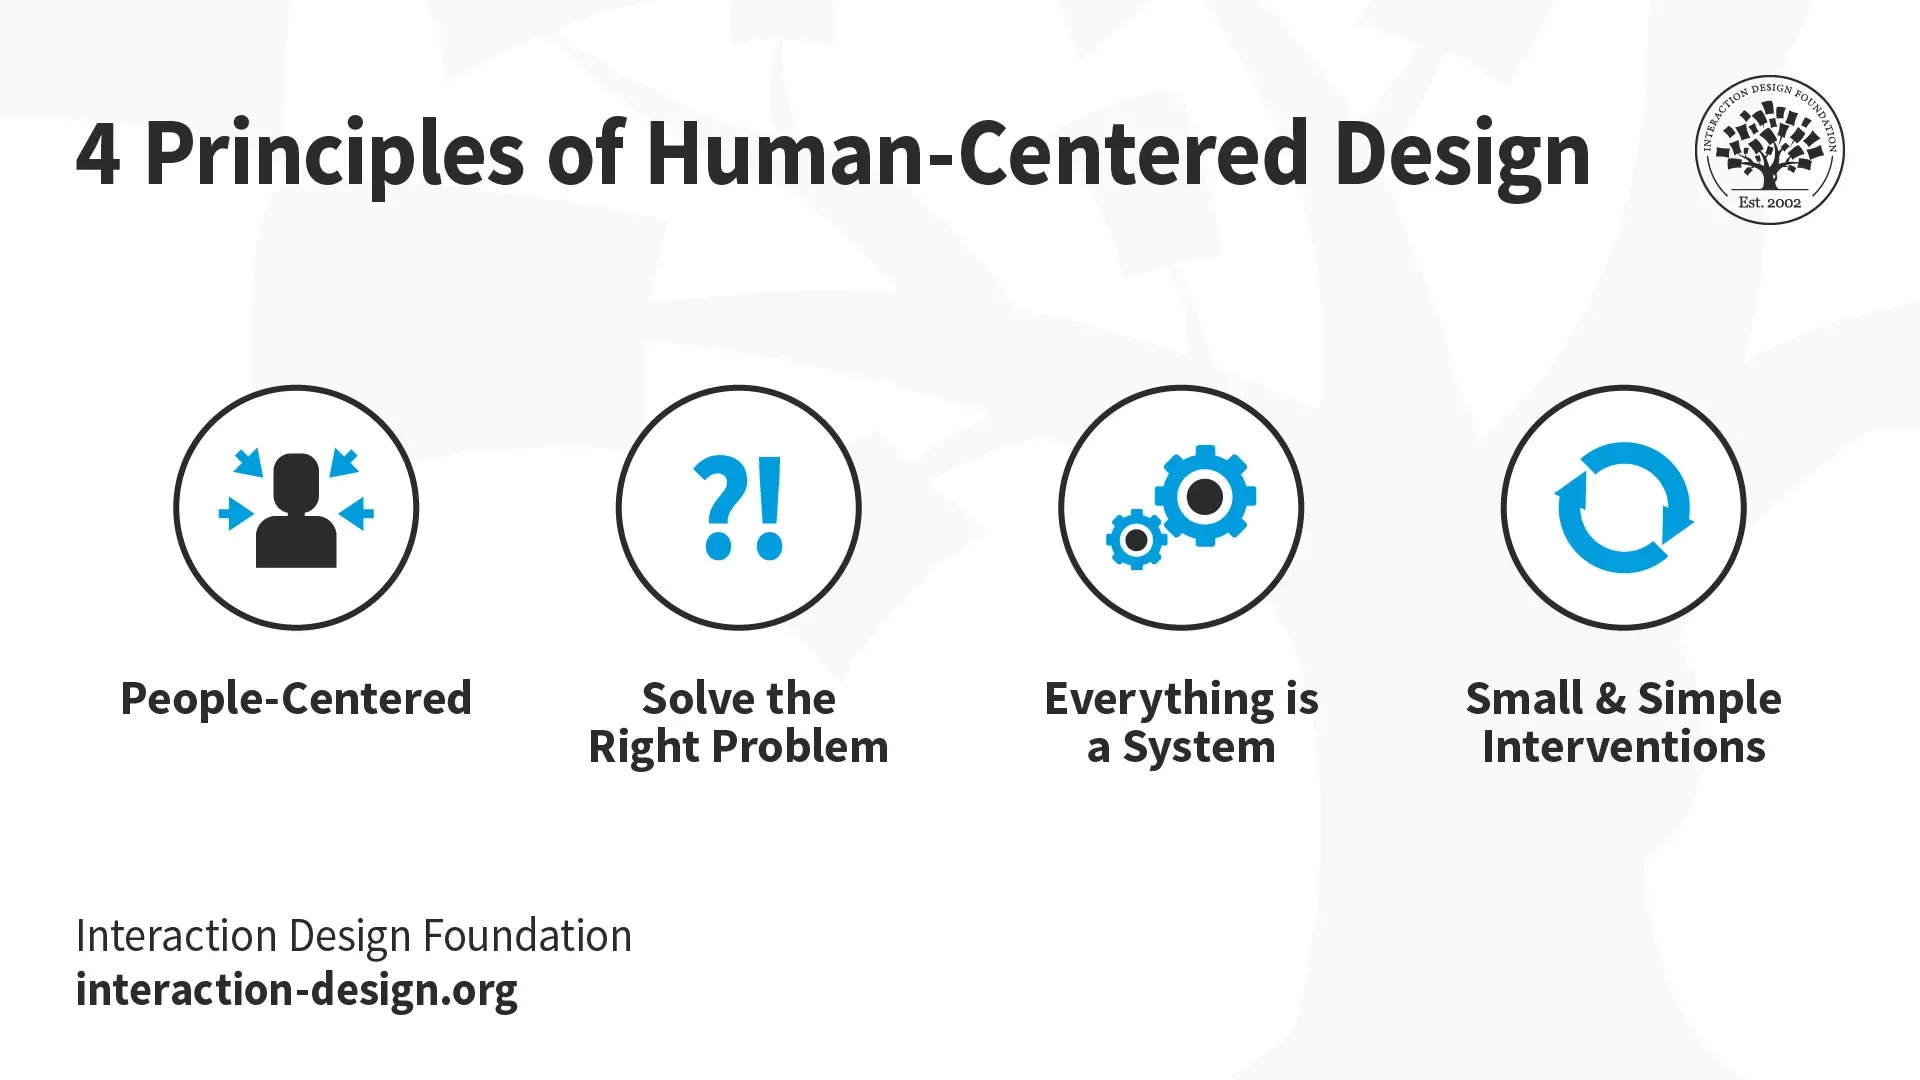 The Interaction Design Foundations 4 Principles of Human-Centered Design. 1: People-Centered, 2: Solve the right problem, 3: Everything is a System, 4: Small &amp; Simple Interventions.